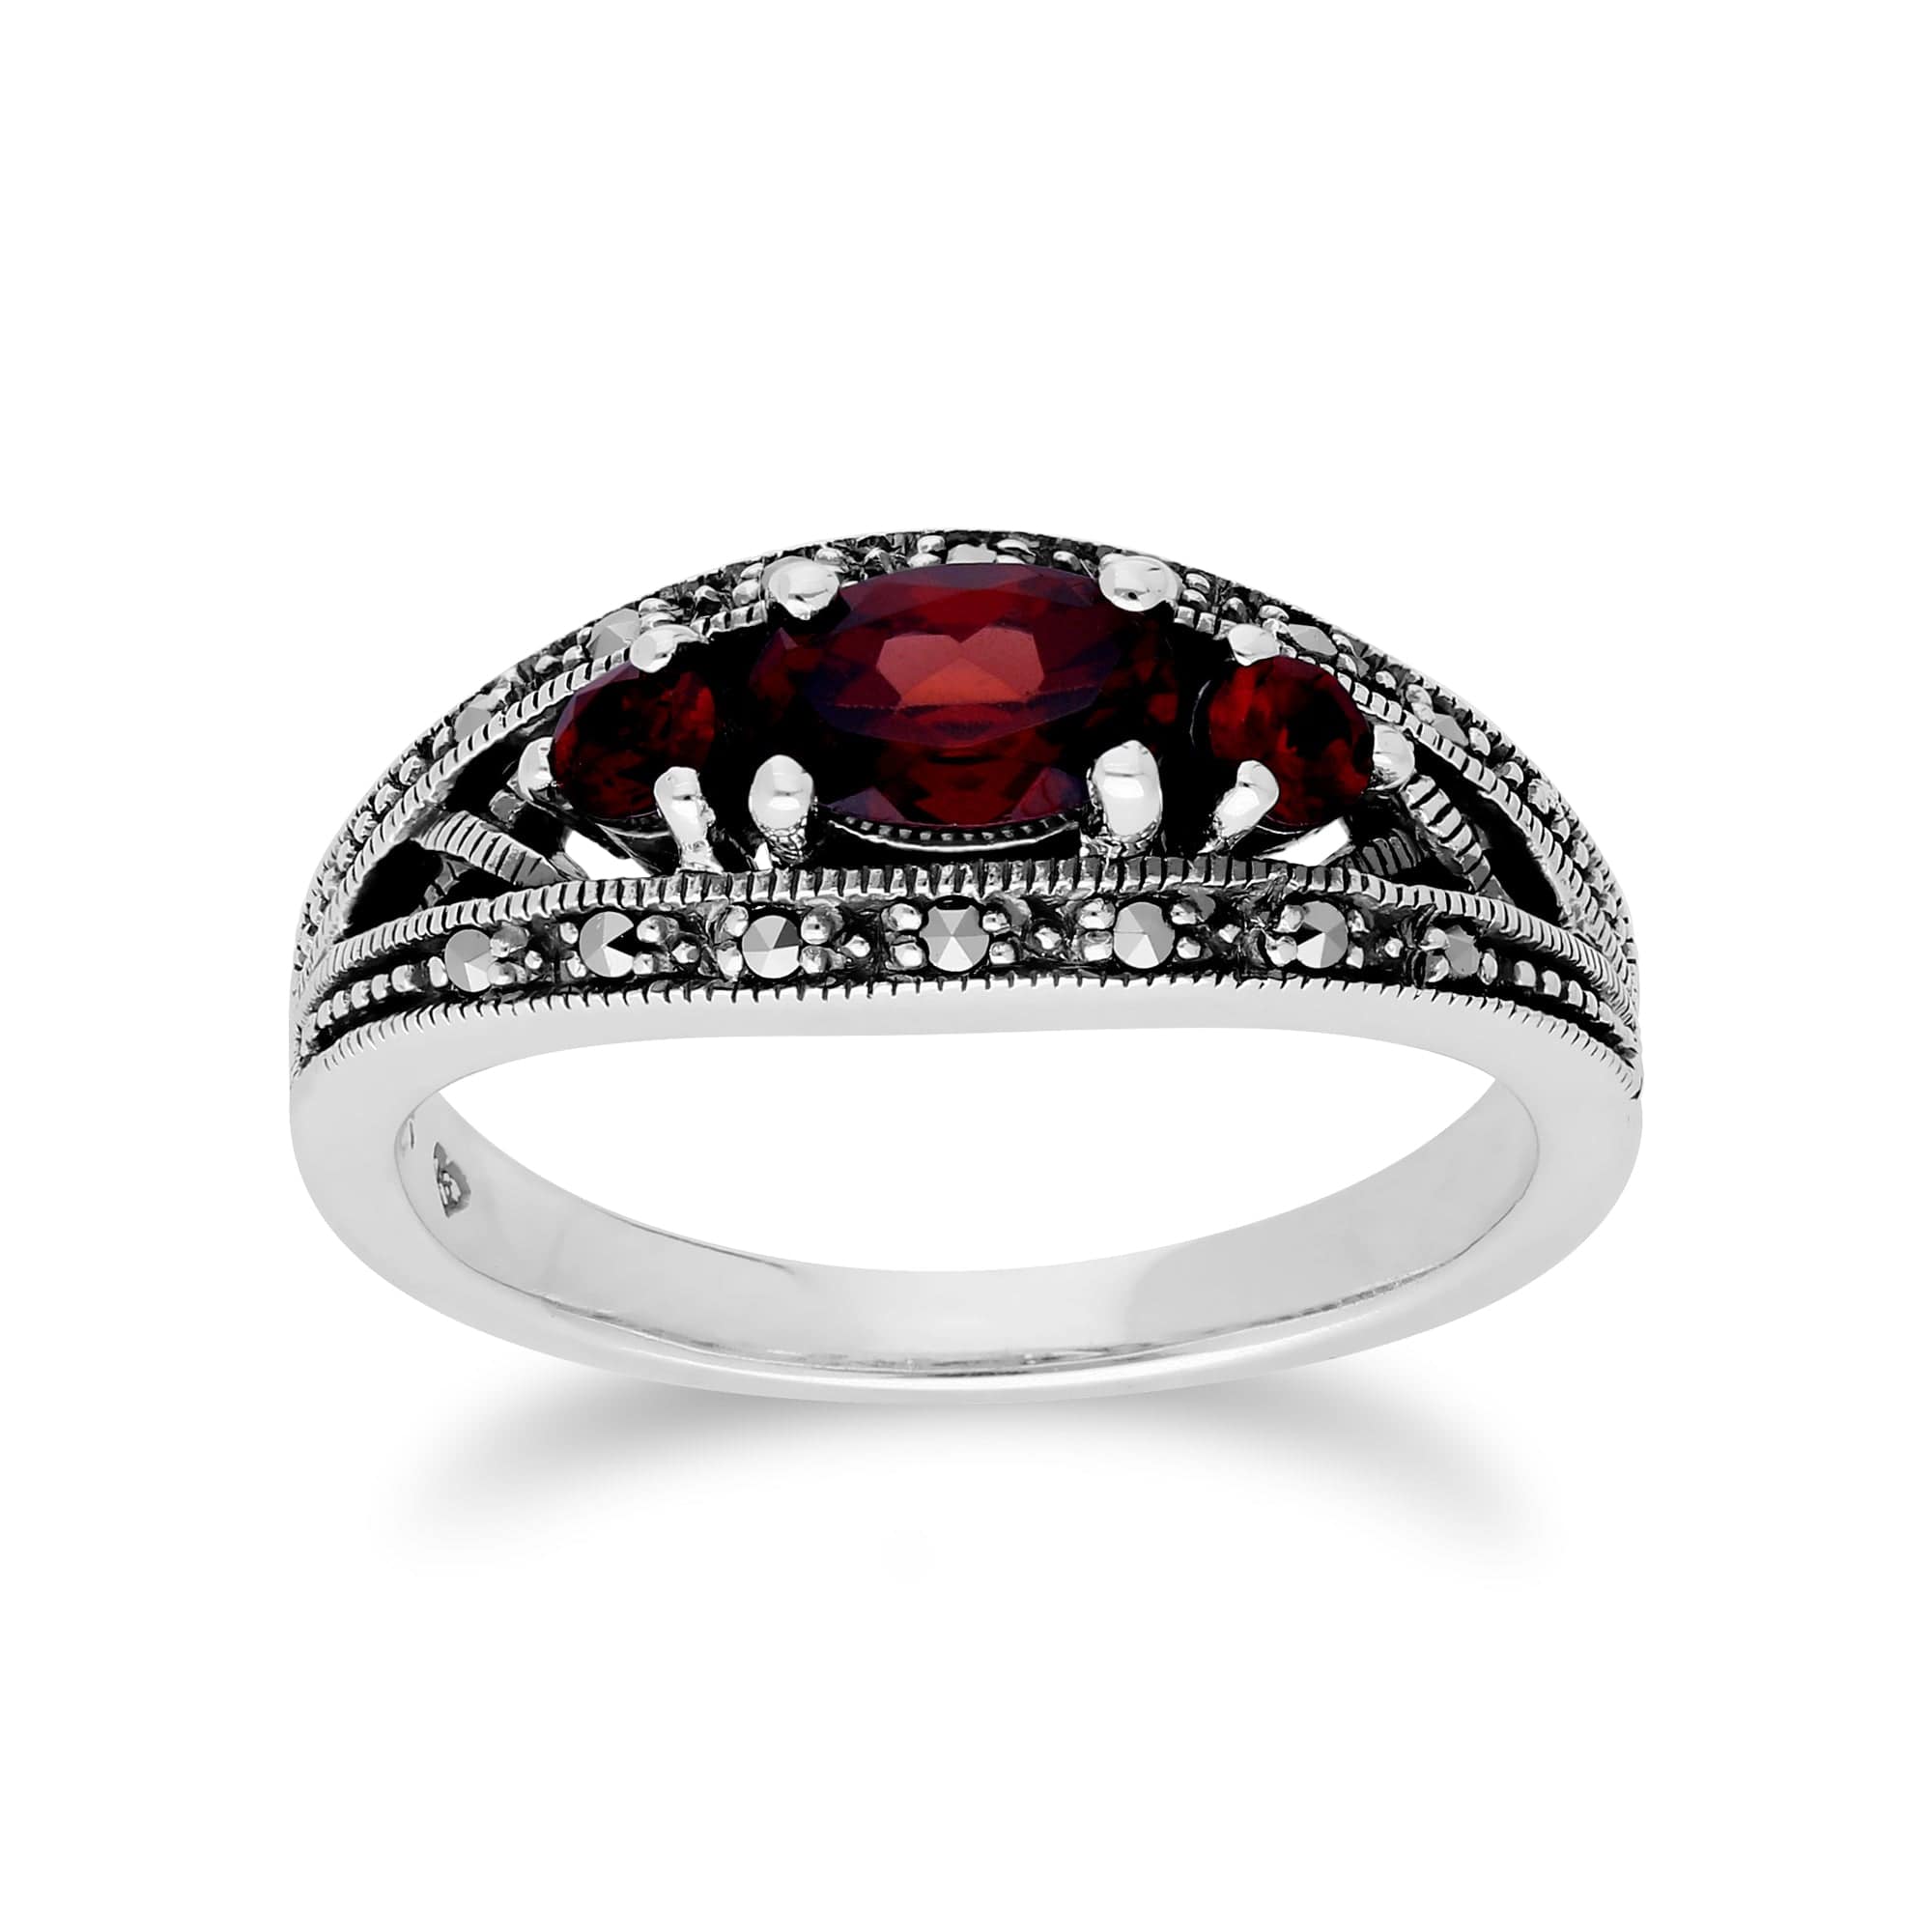 214R424002925 Art Deco Style Oval Garnet & Marcasite Three Stone Ring in 925 Sterling Silver 1